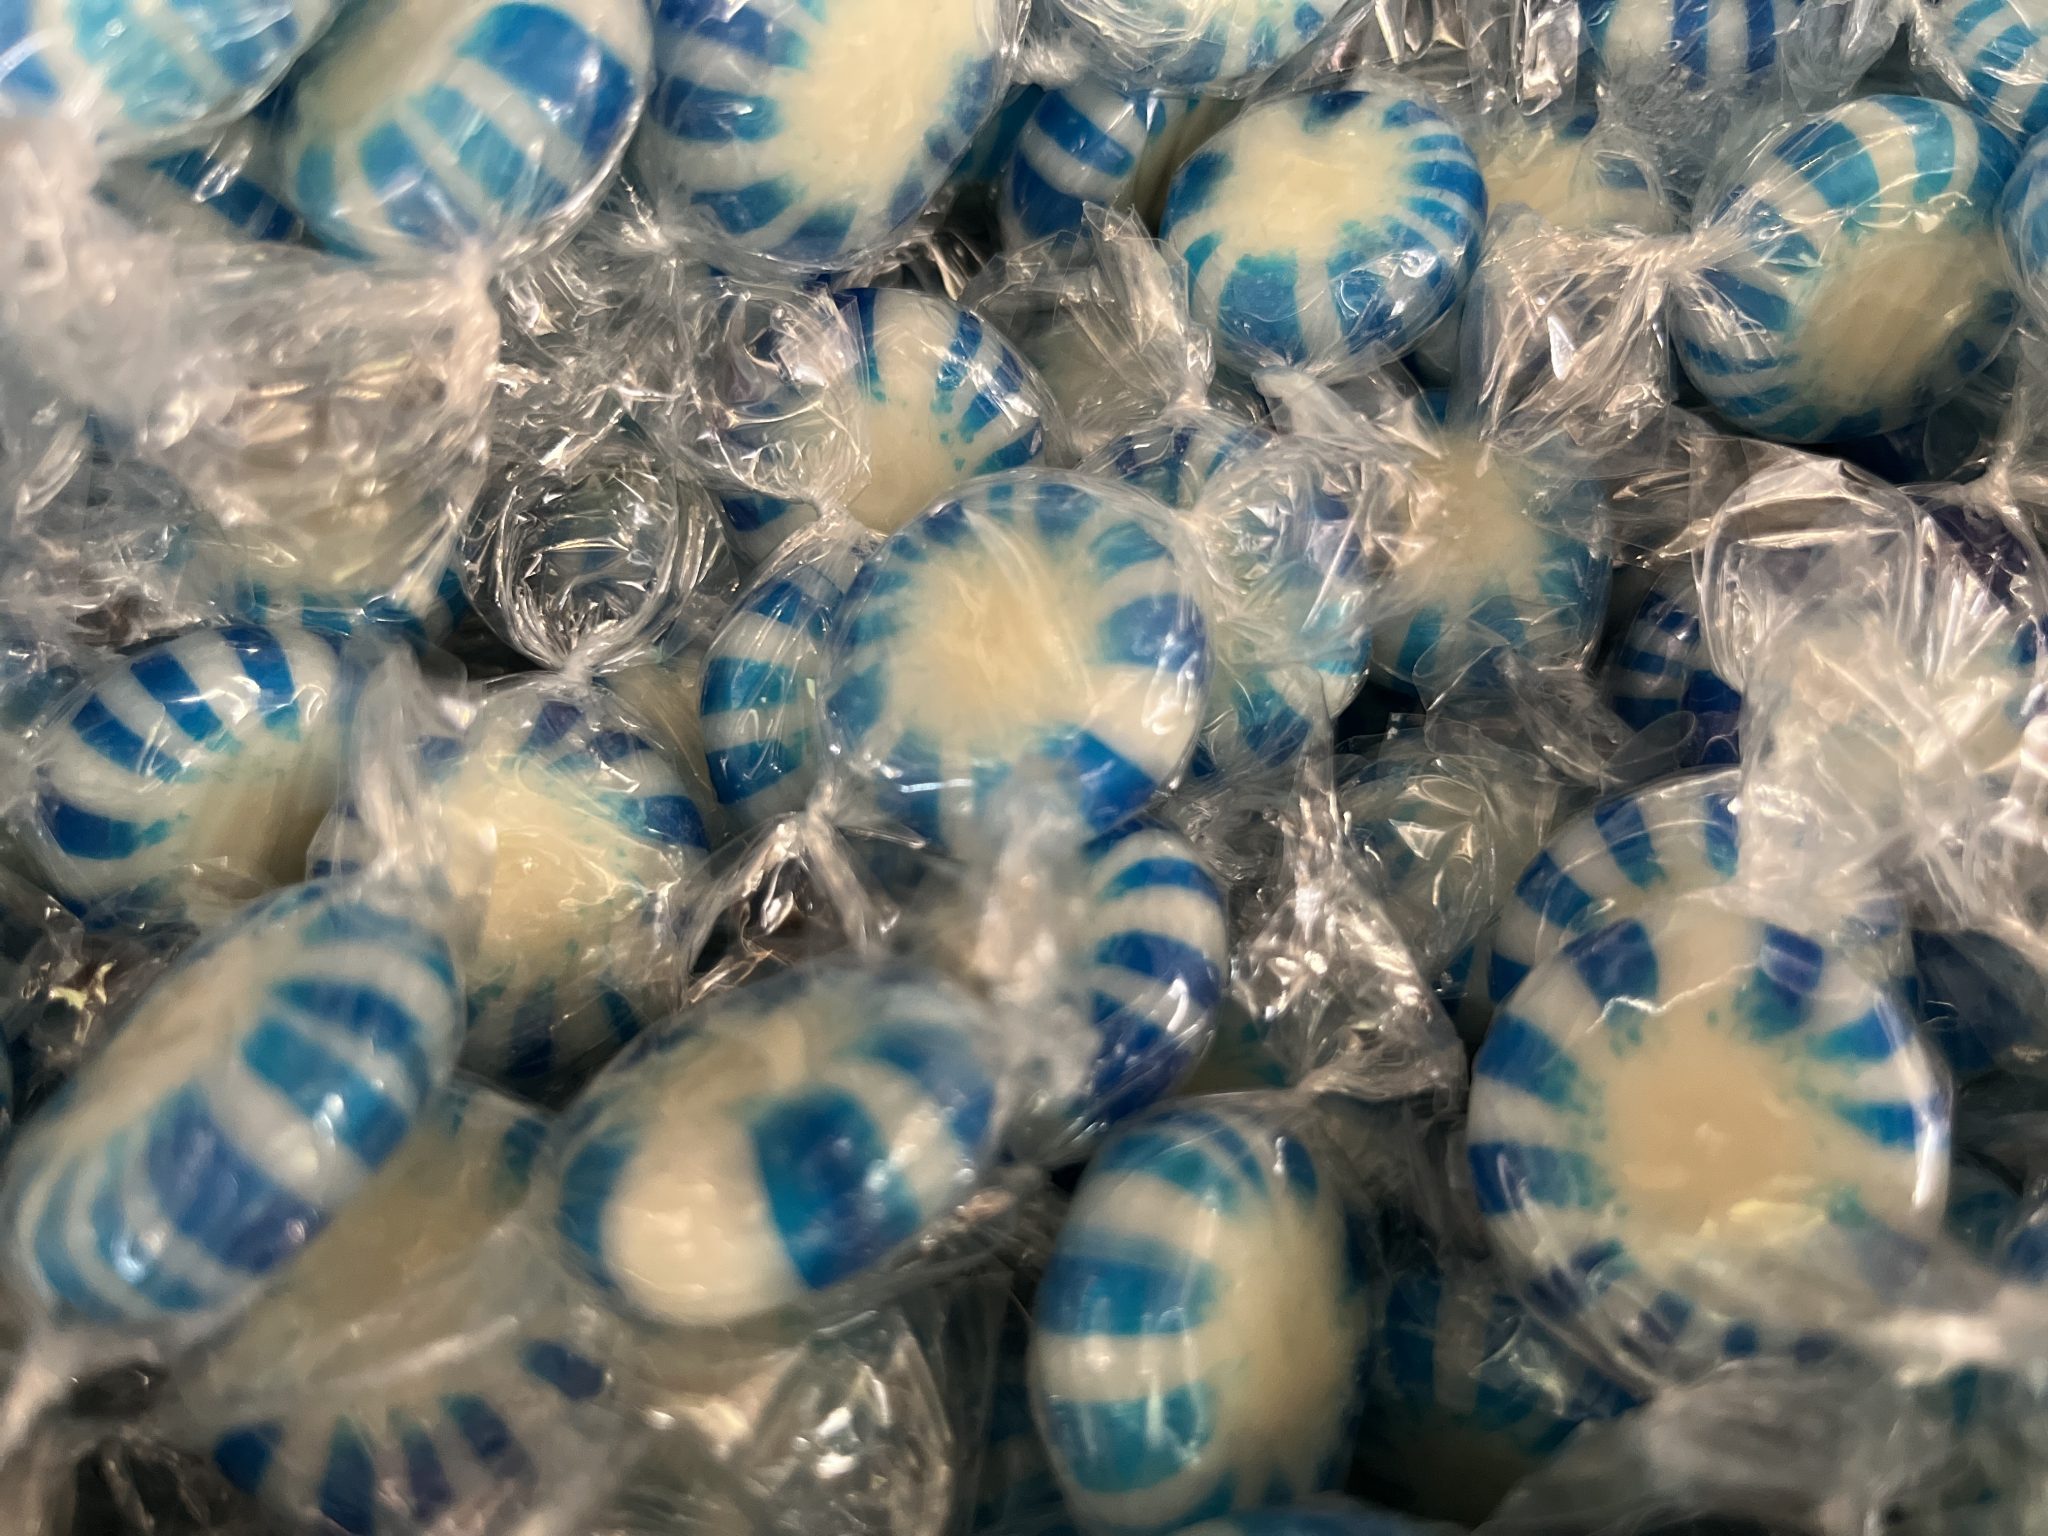 Blue and white candies